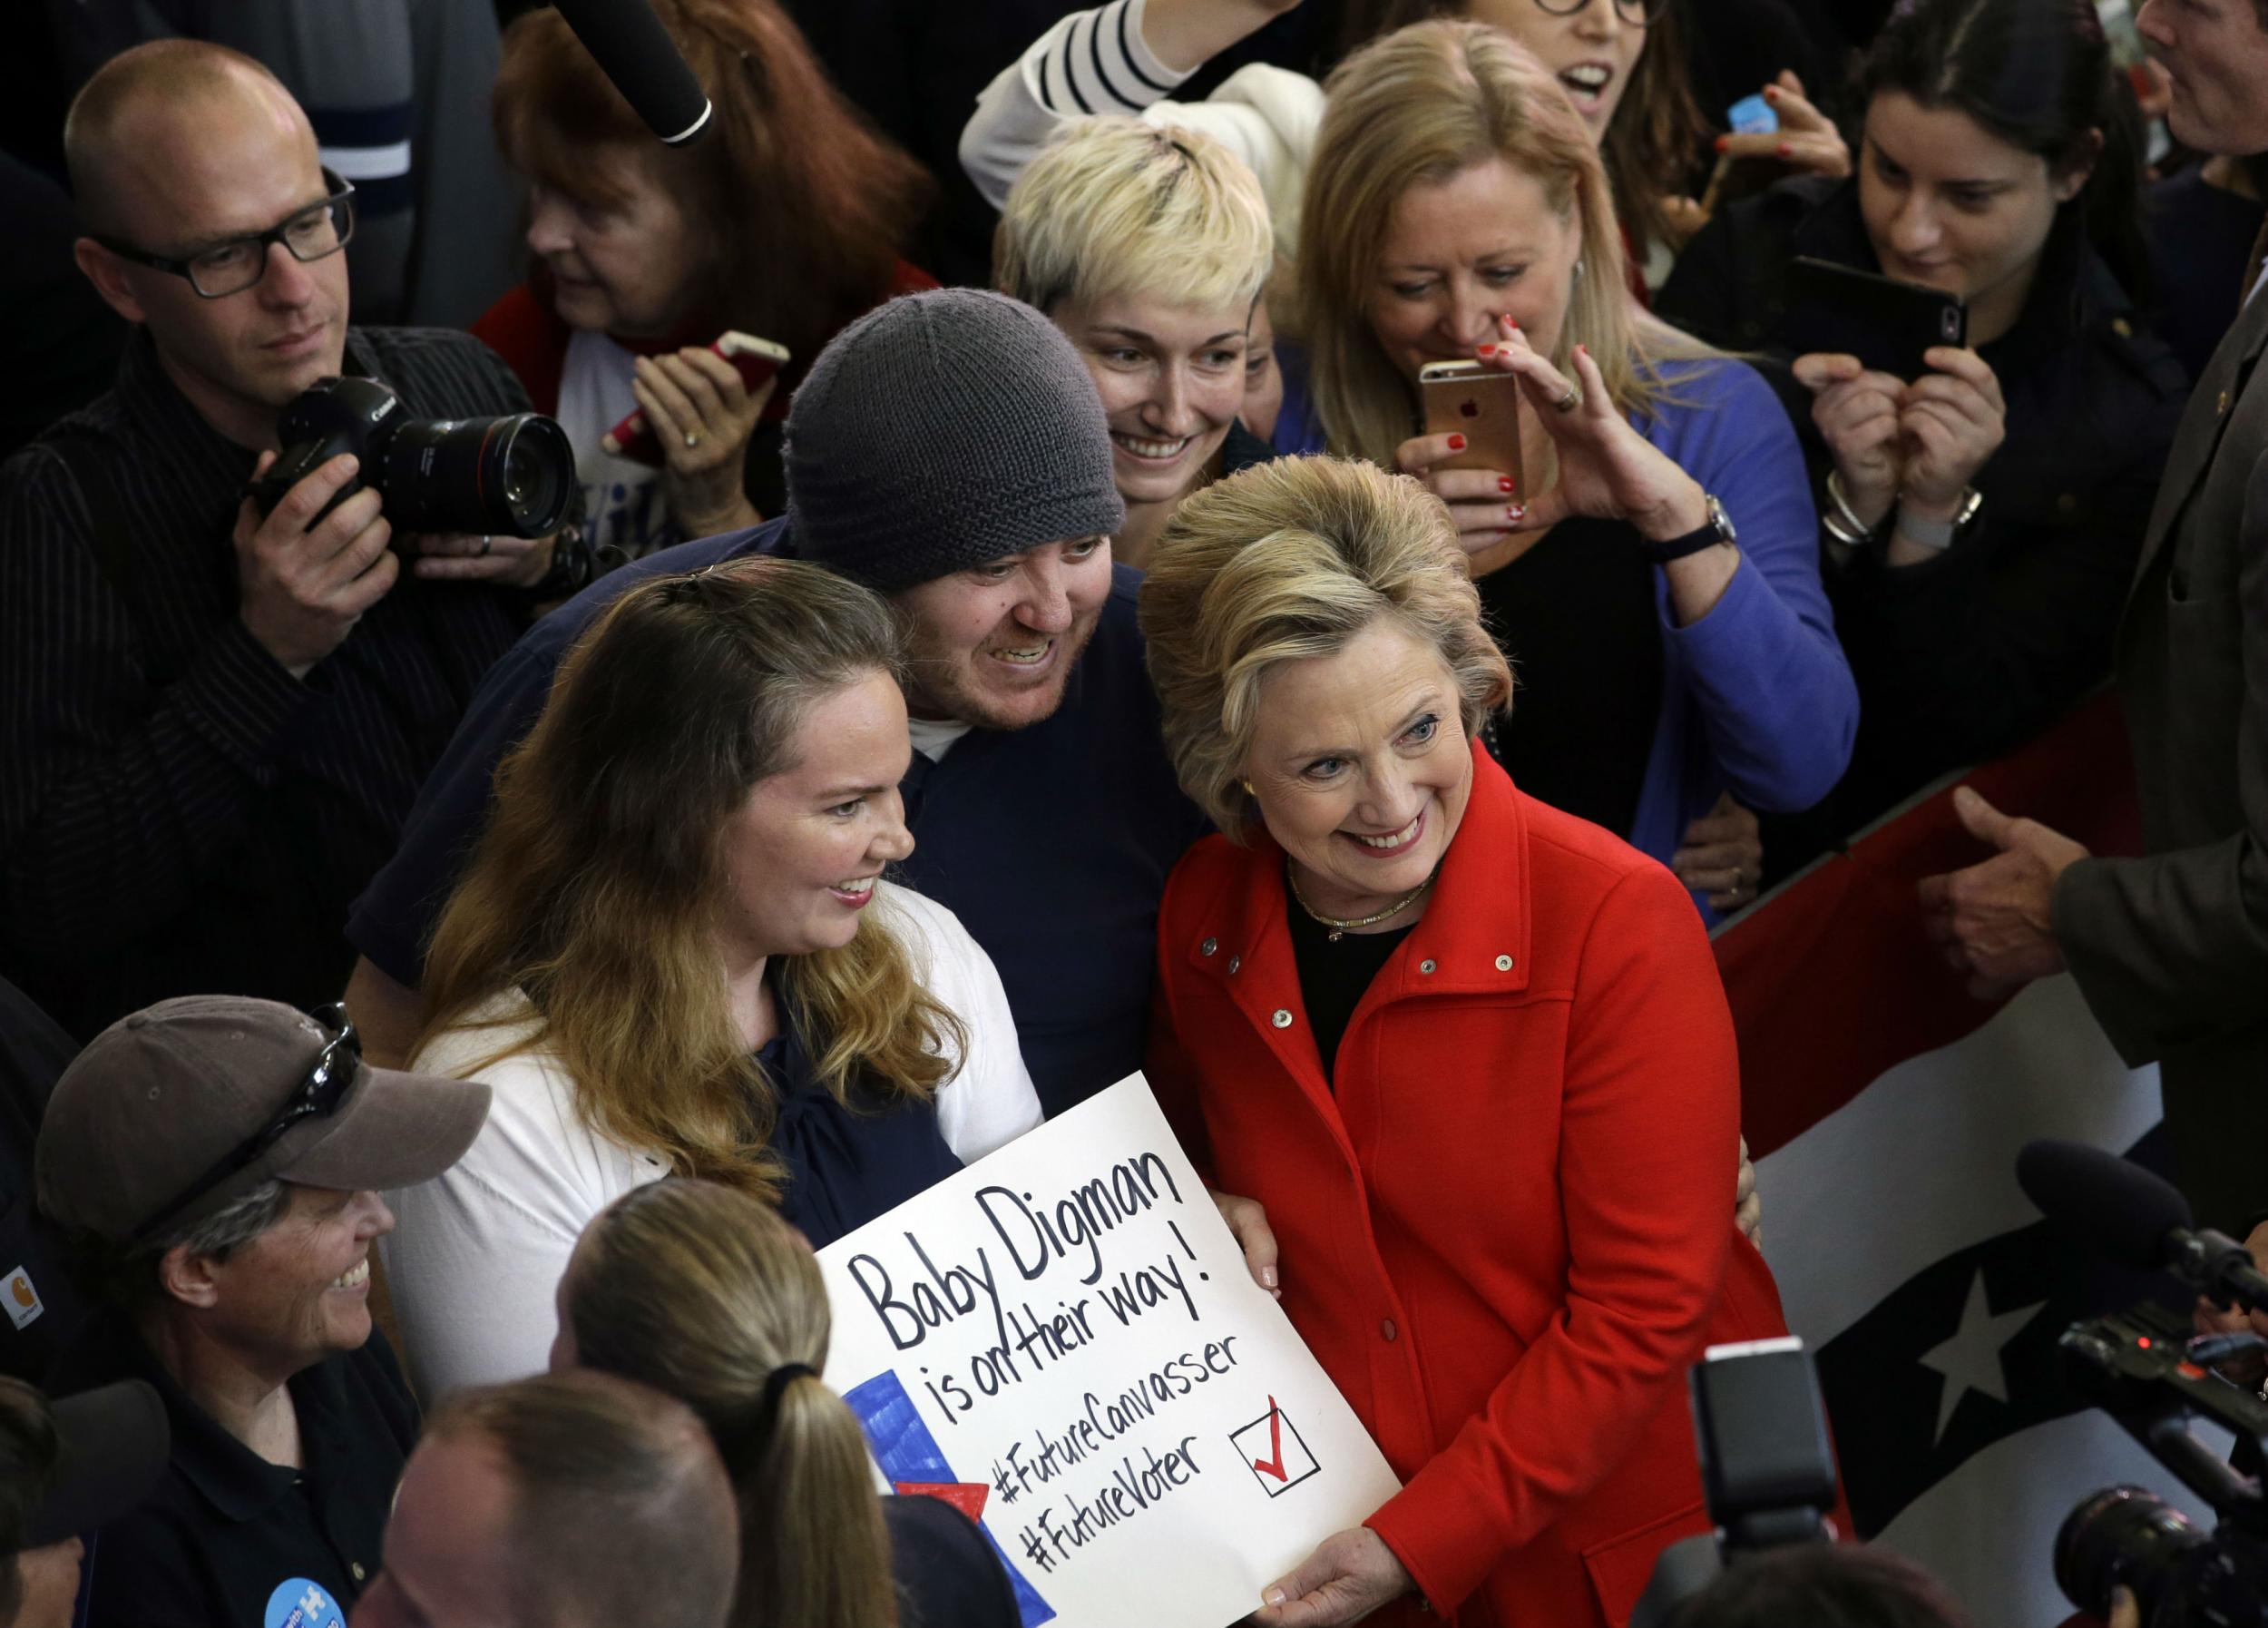 Ms Clinton was campaigning ahead of a Democratic primary contest in Nevada